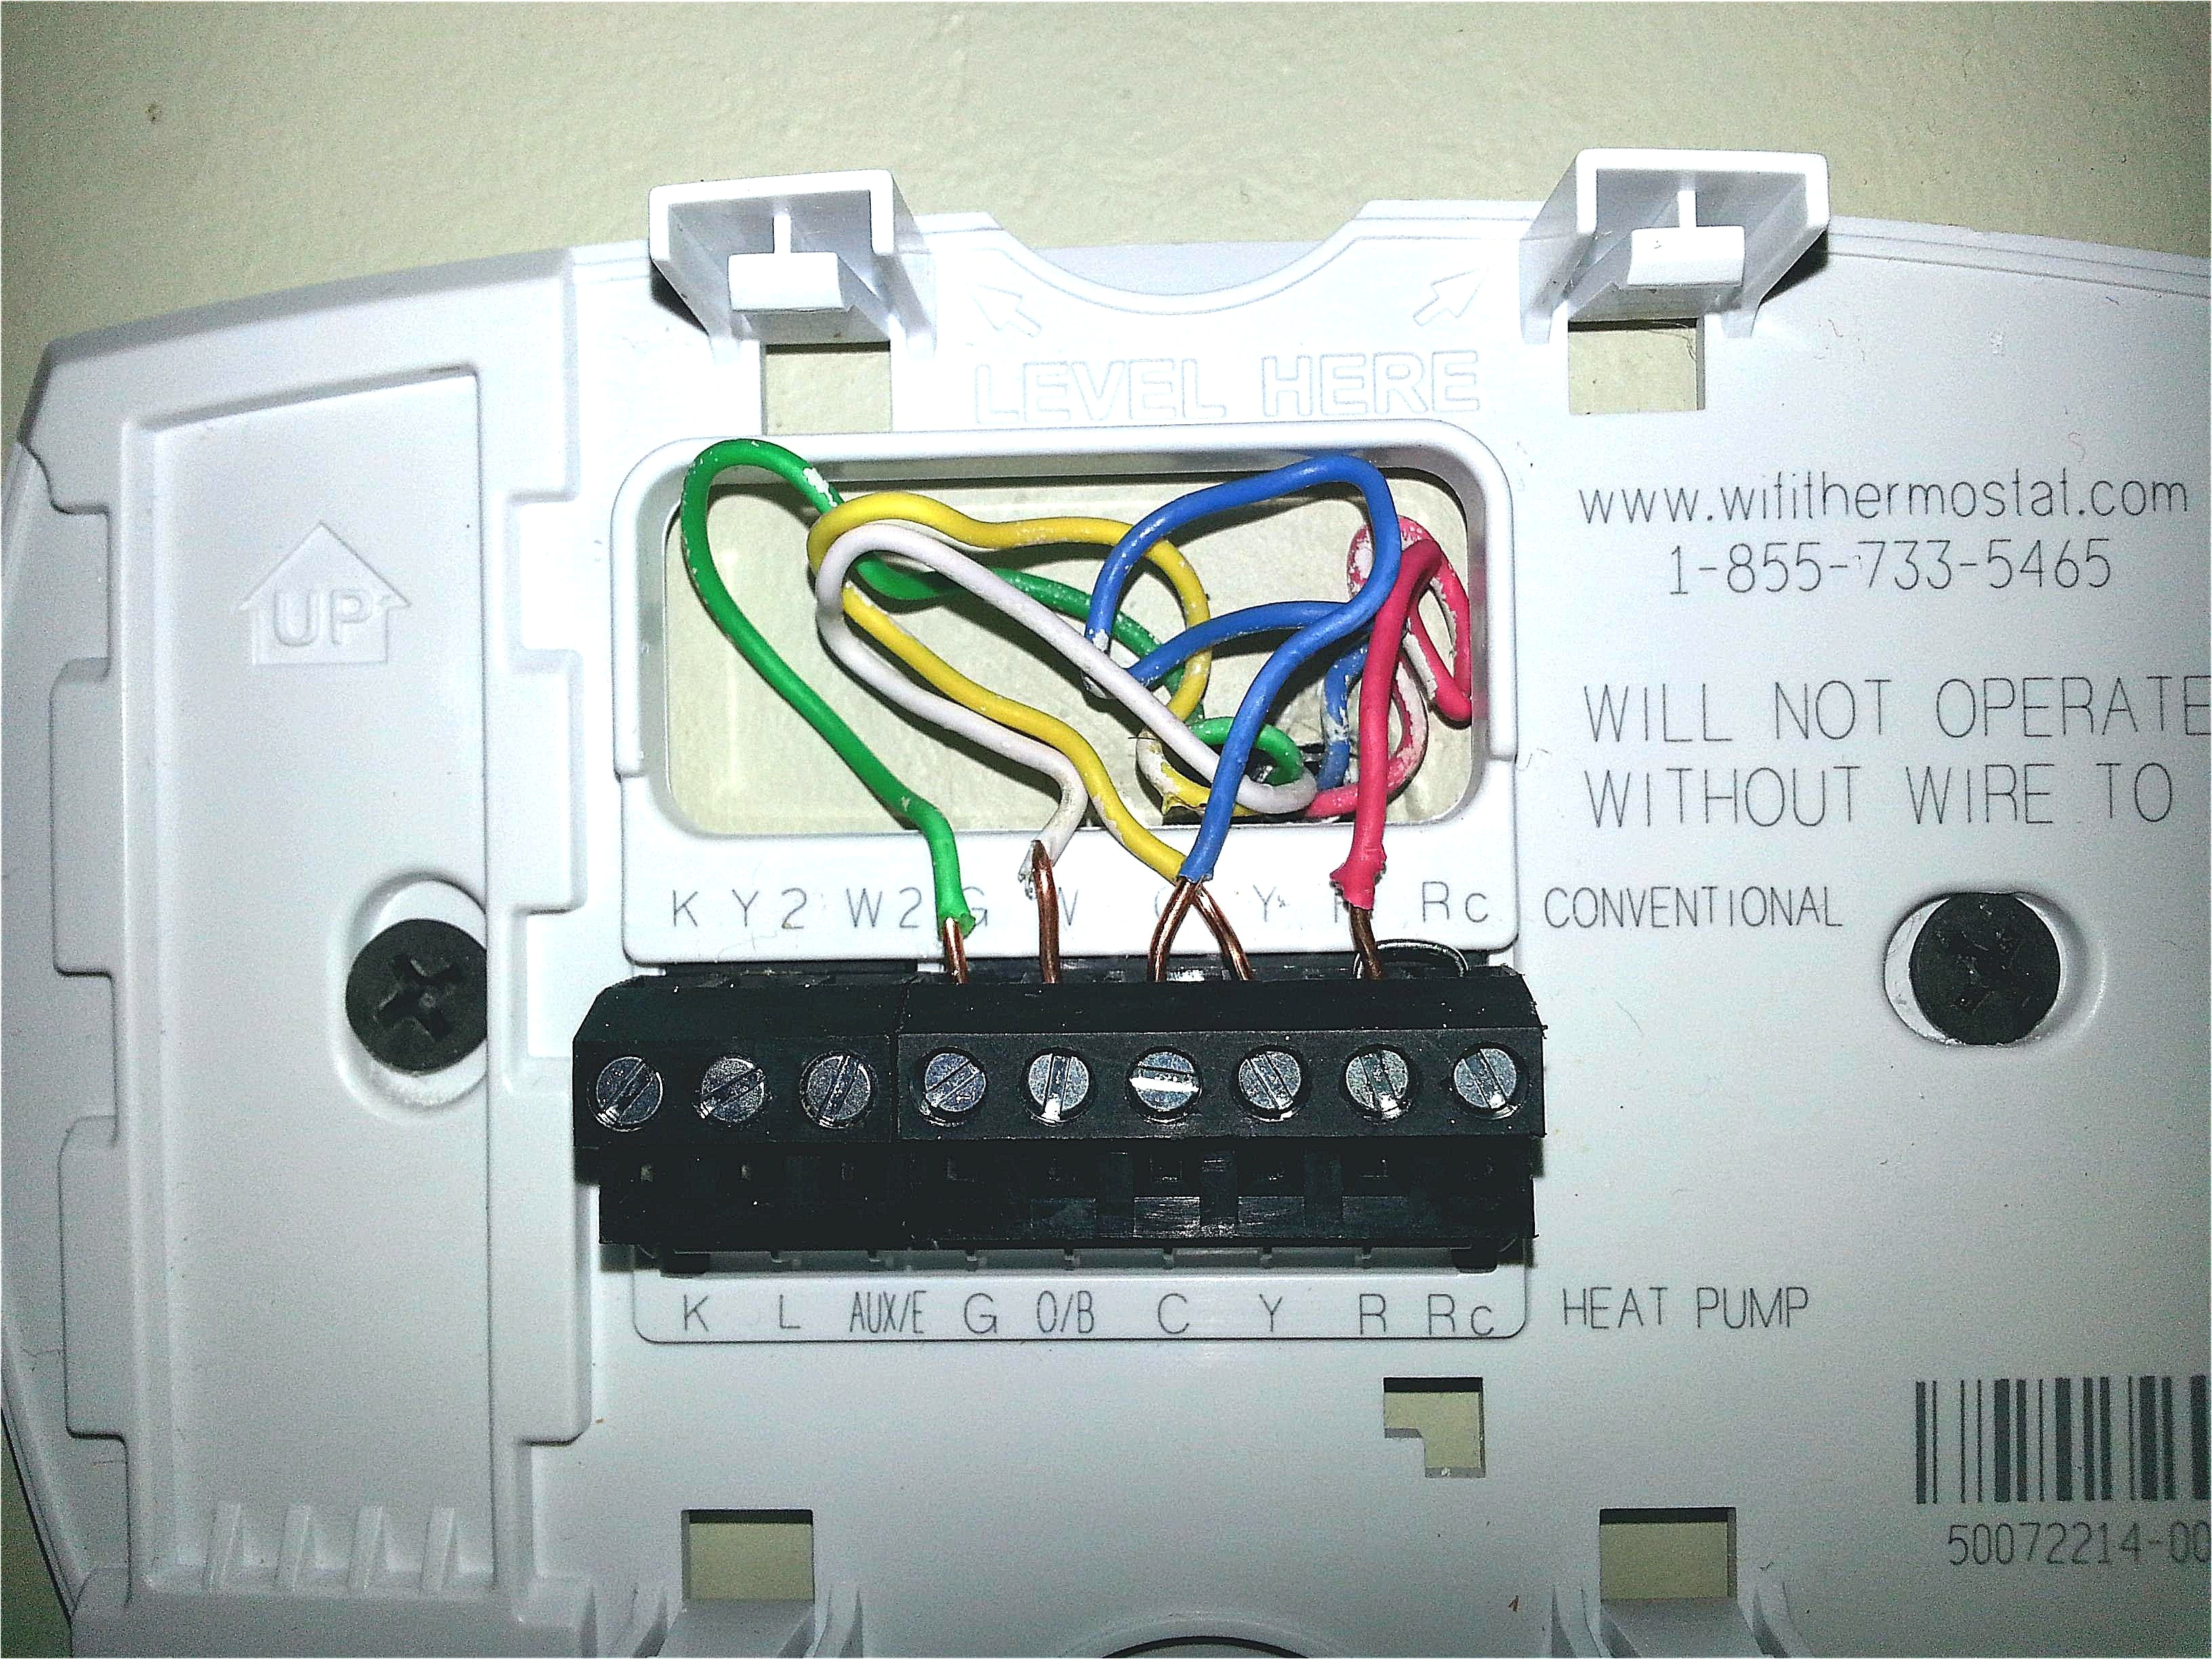 wiring diagram likewise wiring a honeywell thermostat electric heat wire diagram diyhousehelpcom hvac honeywellthermostatwiring wiring diagram